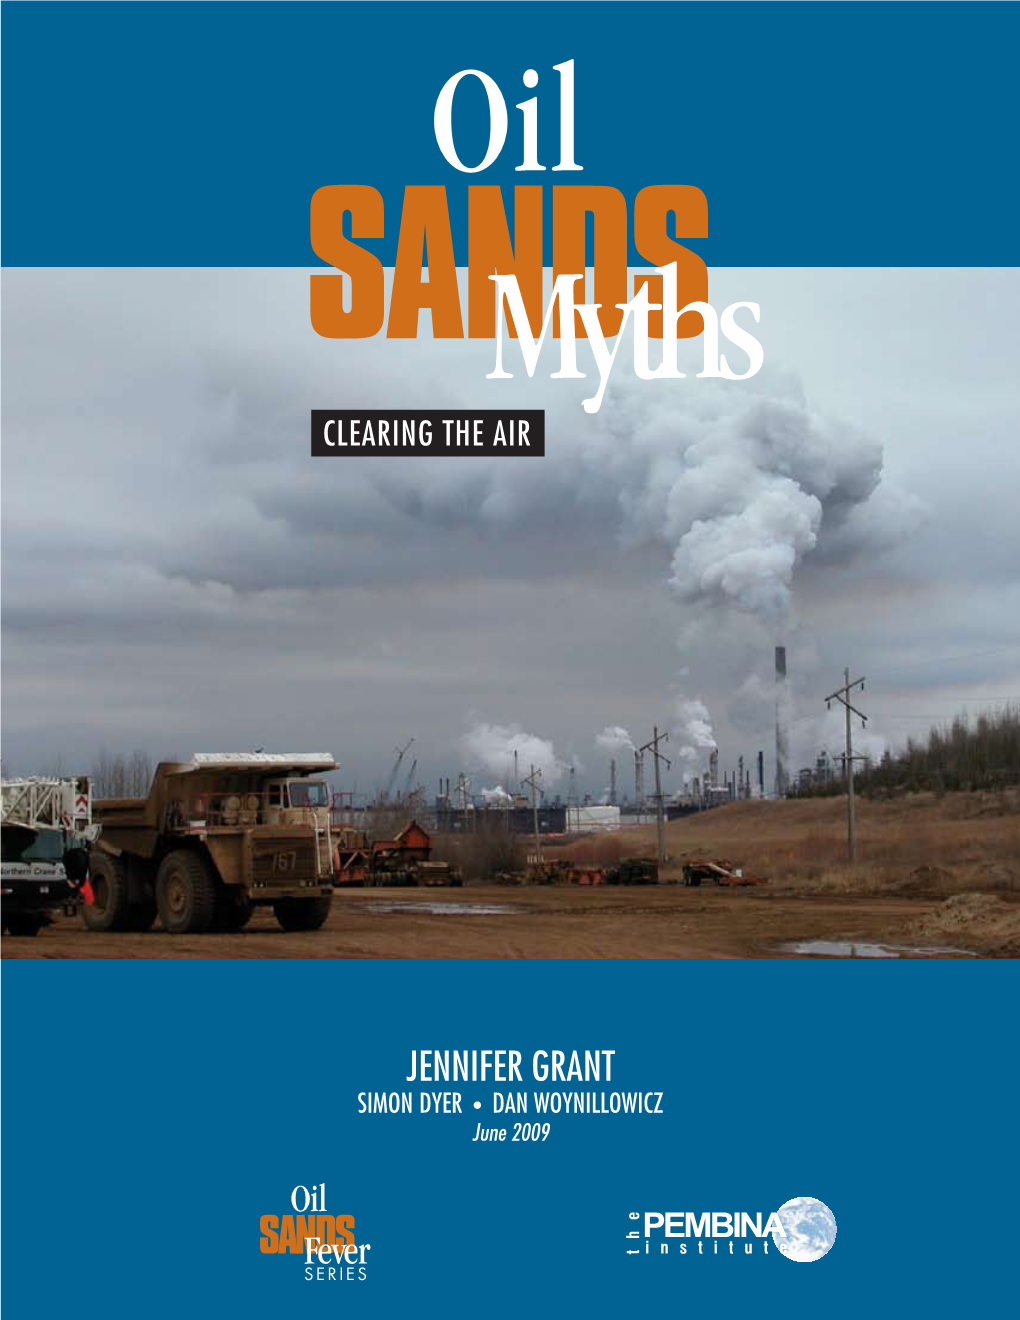 Clearing the Air on Oil Sands Myths